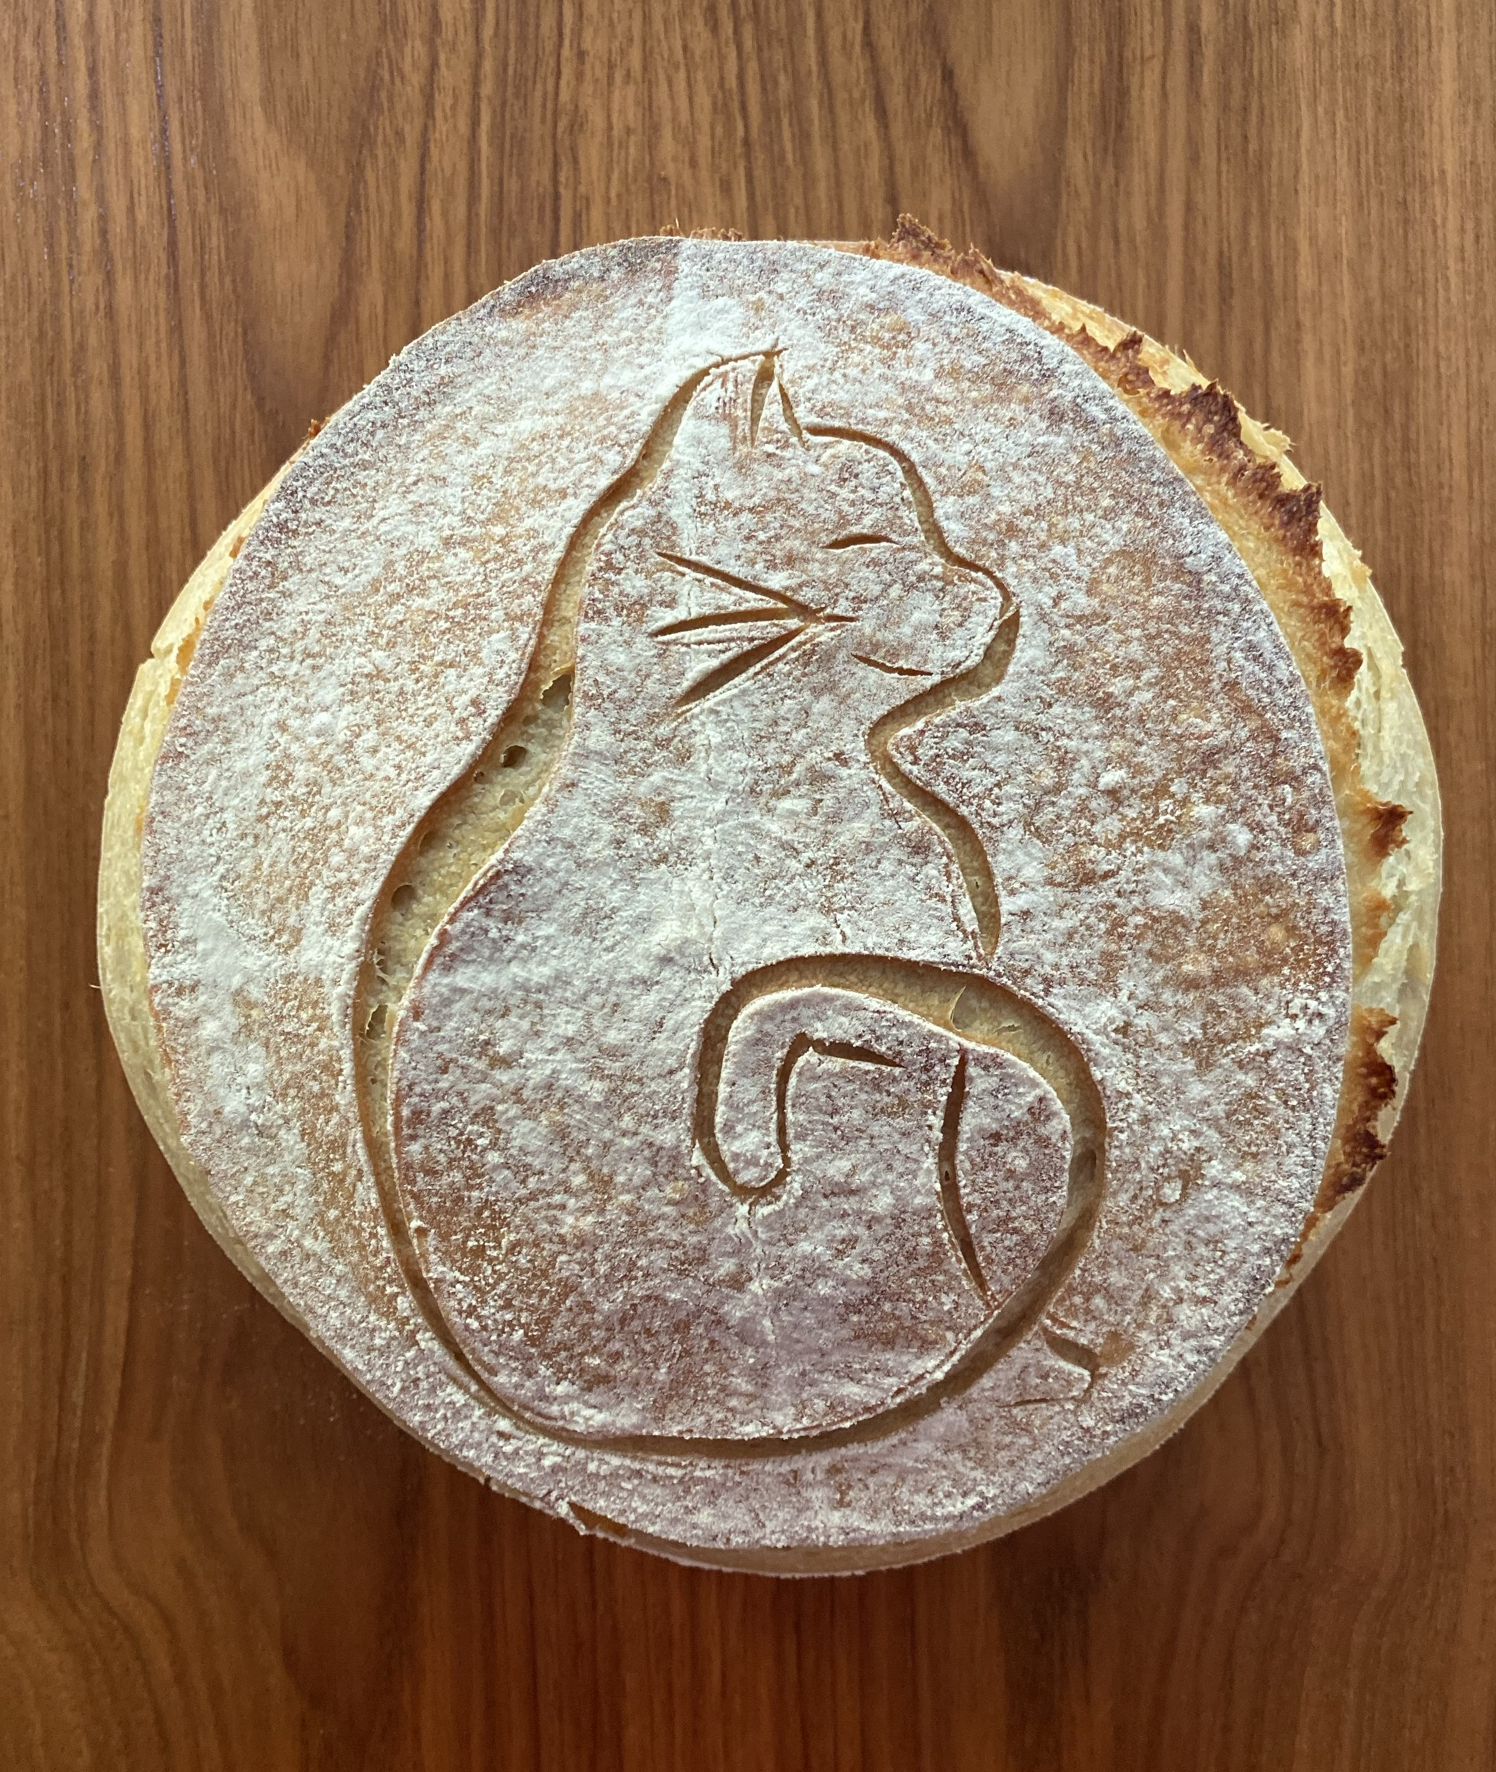 interview with @birdysbread from instagram sourdough bread baker influencer on social media in british columbia canada 2